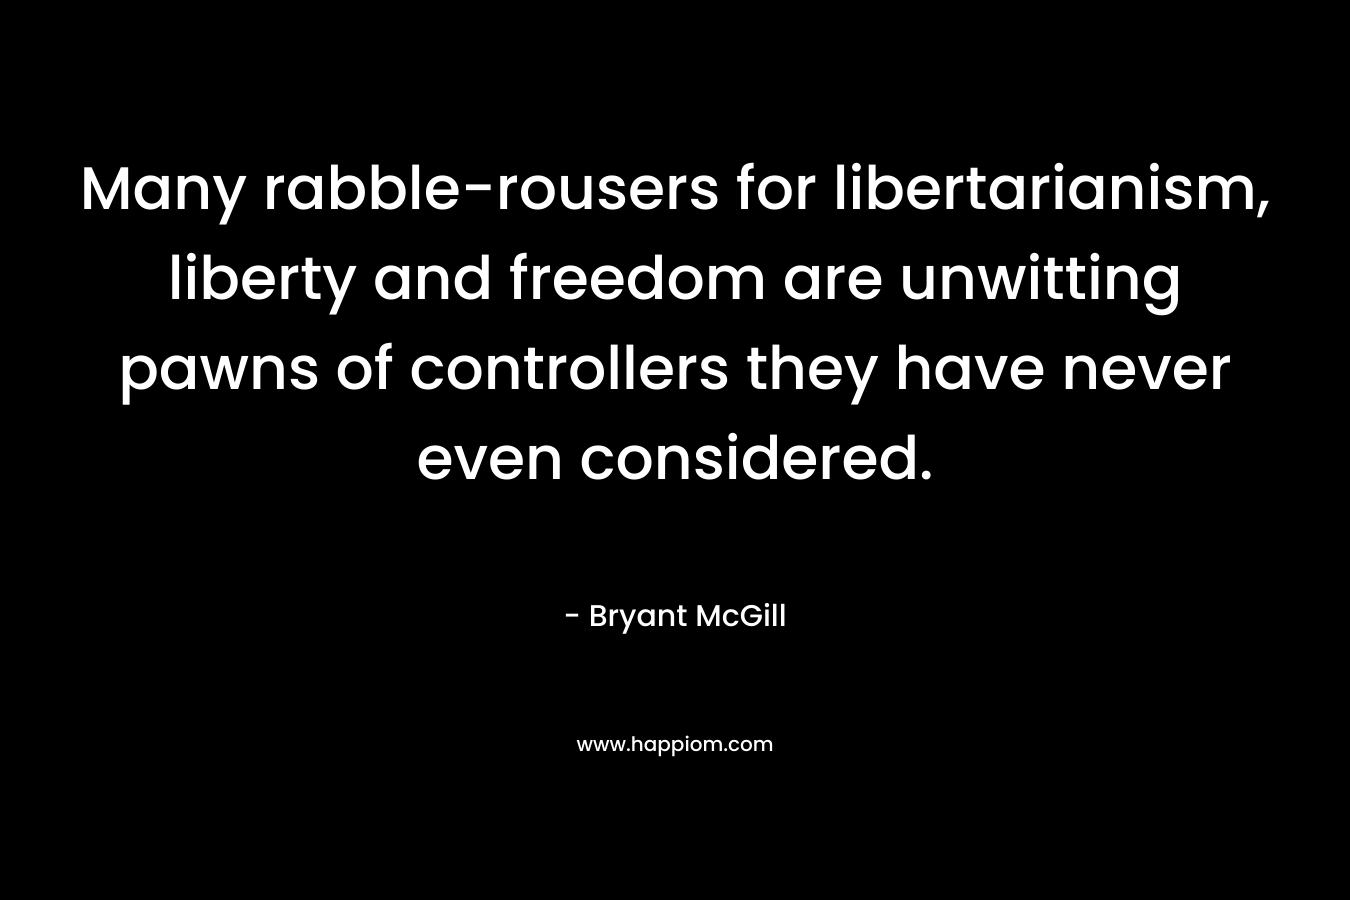 Many rabble-rousers for libertarianism, liberty and freedom are unwitting pawns of controllers they have never even considered. – Bryant McGill